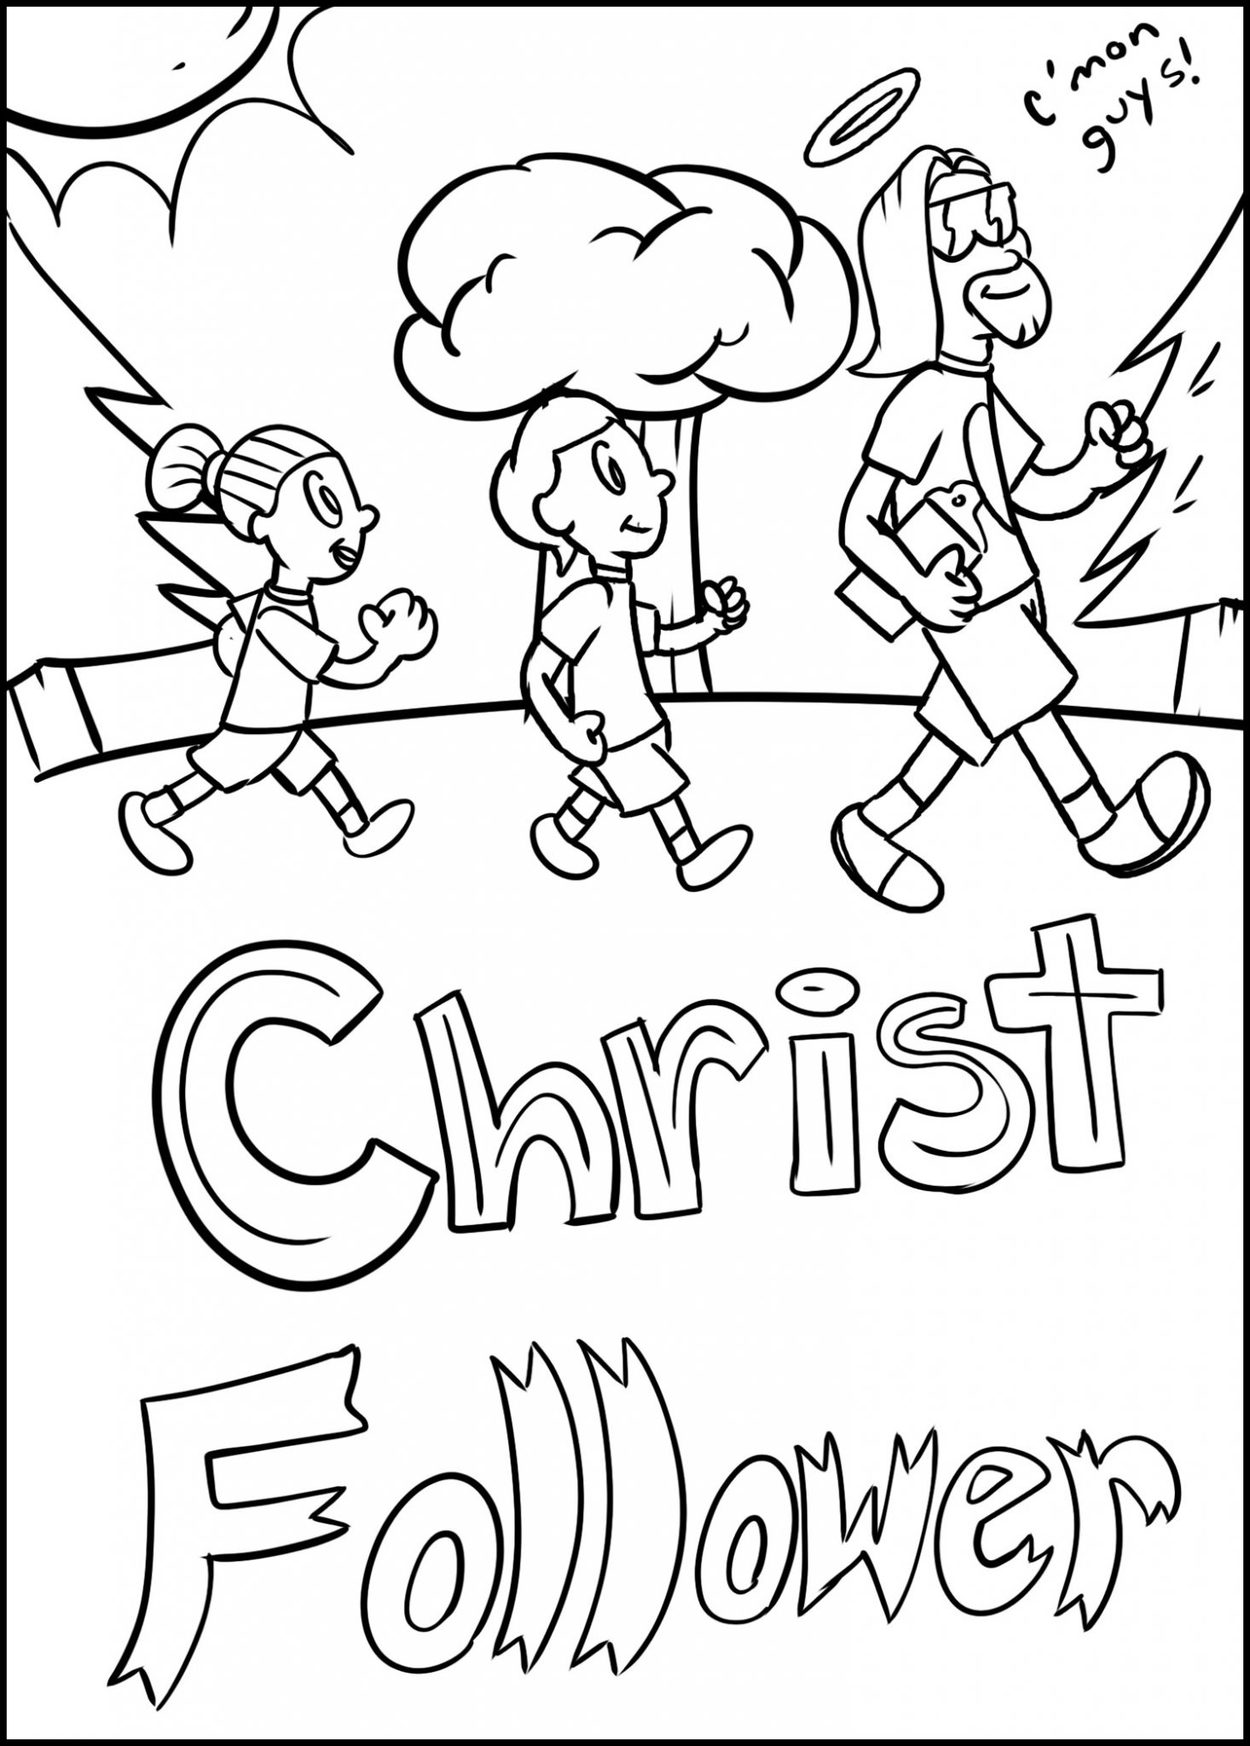 FREE Camp Coloring Book for Kids! - Christian Camp Pro